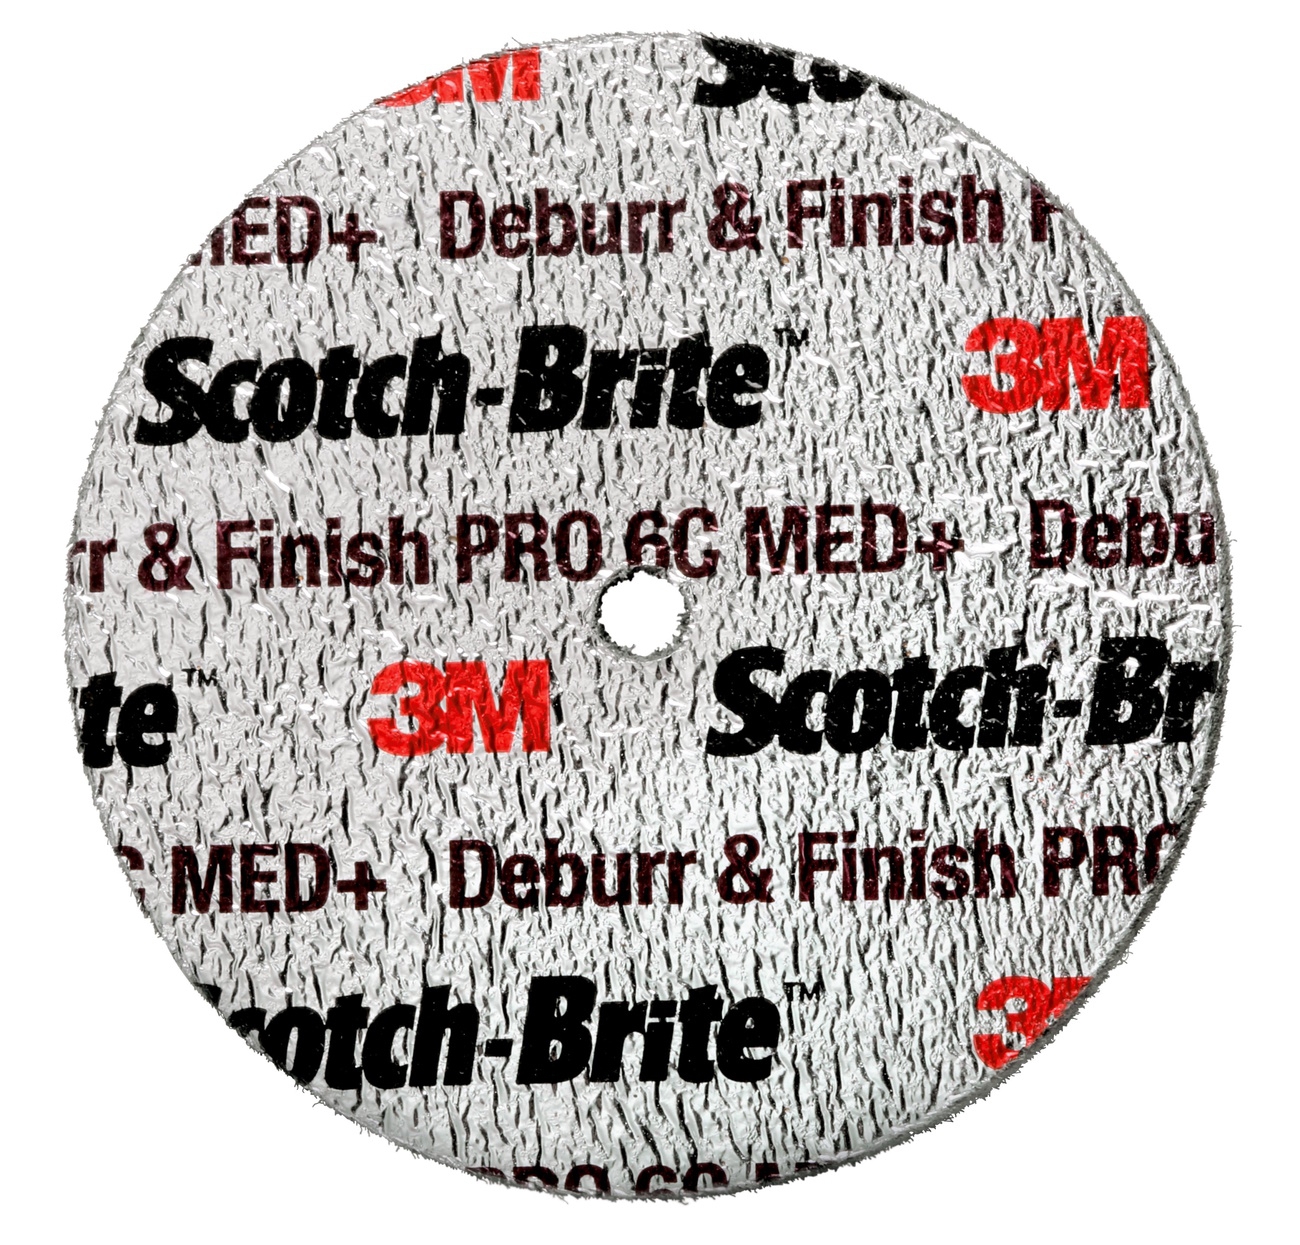 3M Scotch-Brite Deburr and Finish PRO compact disc DP-UW, 76 mm x 6.35 mm x 6.35 mm, 6C Med+, 40 WL